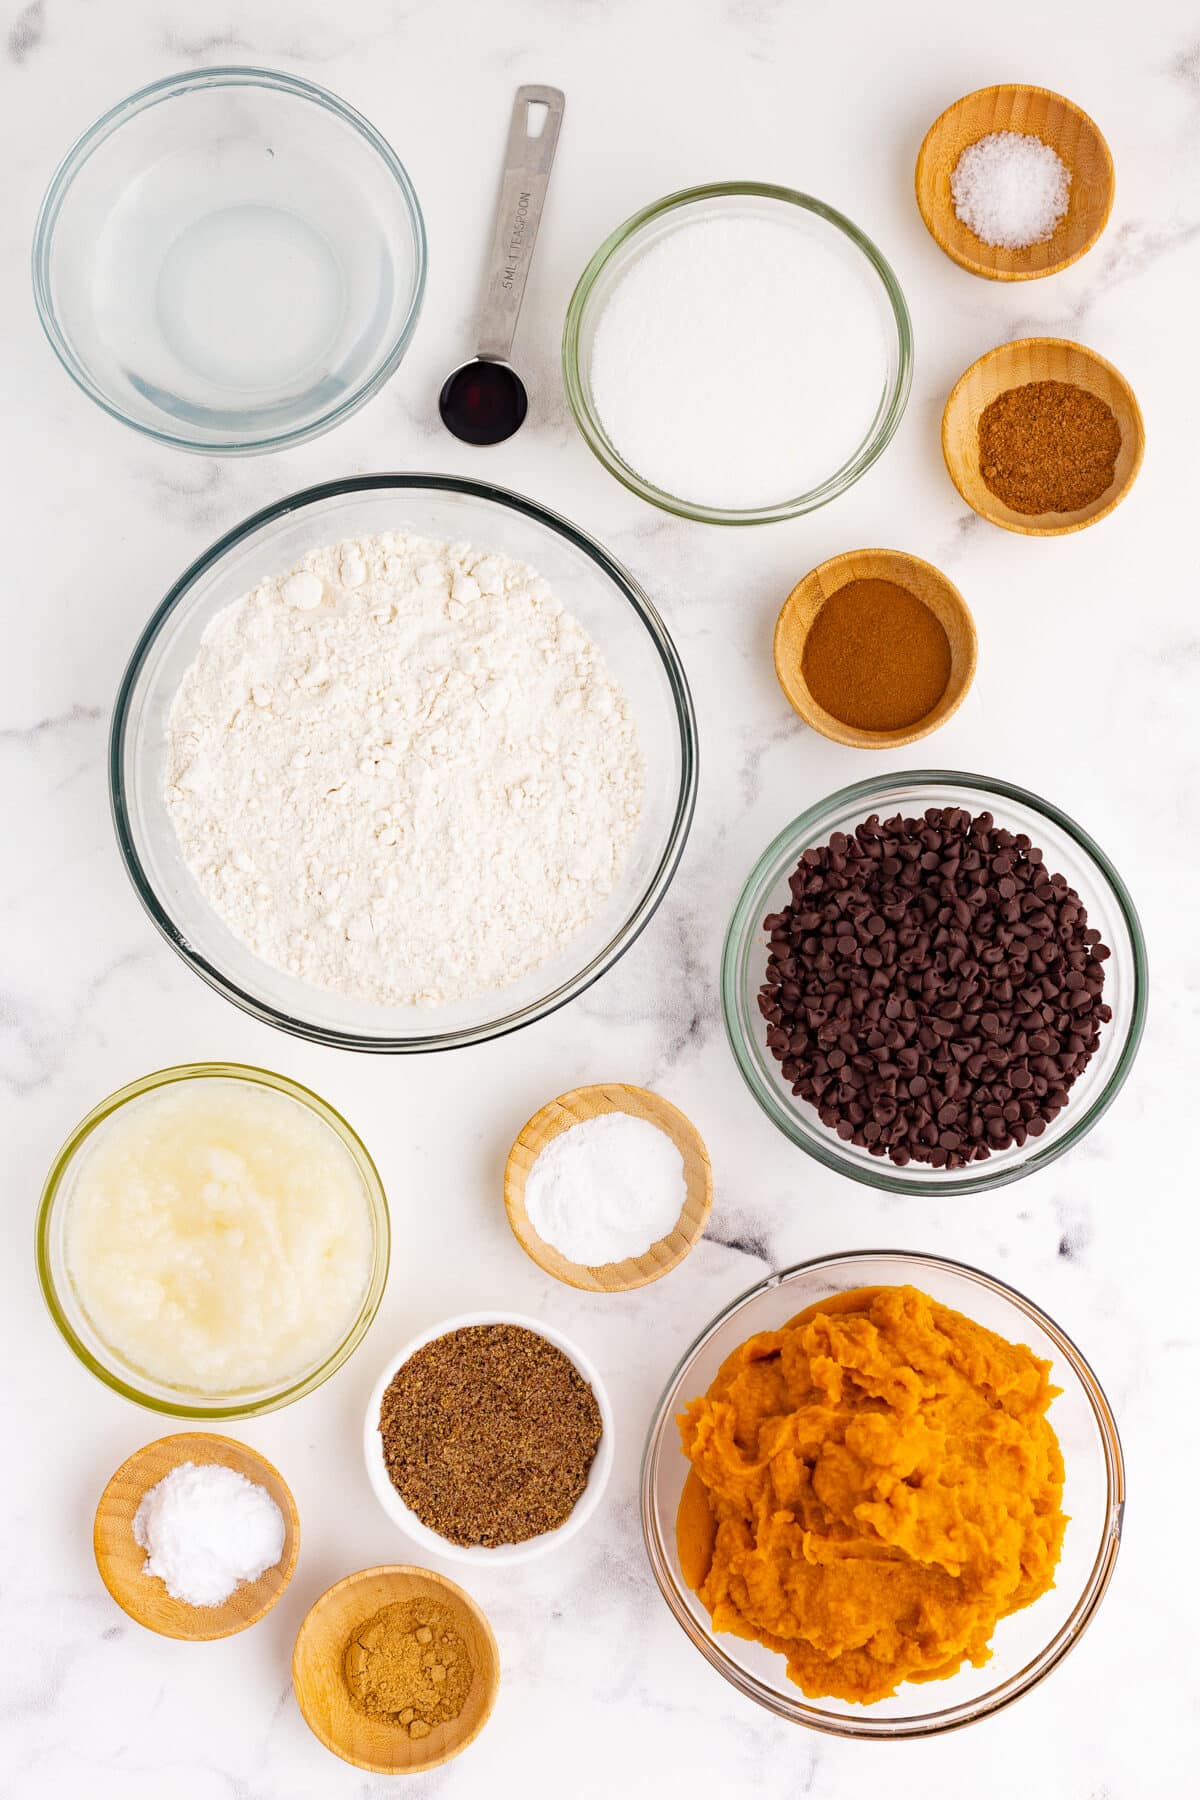 All of the ingredients for pumpkin muffins in individual bowls on a white counter